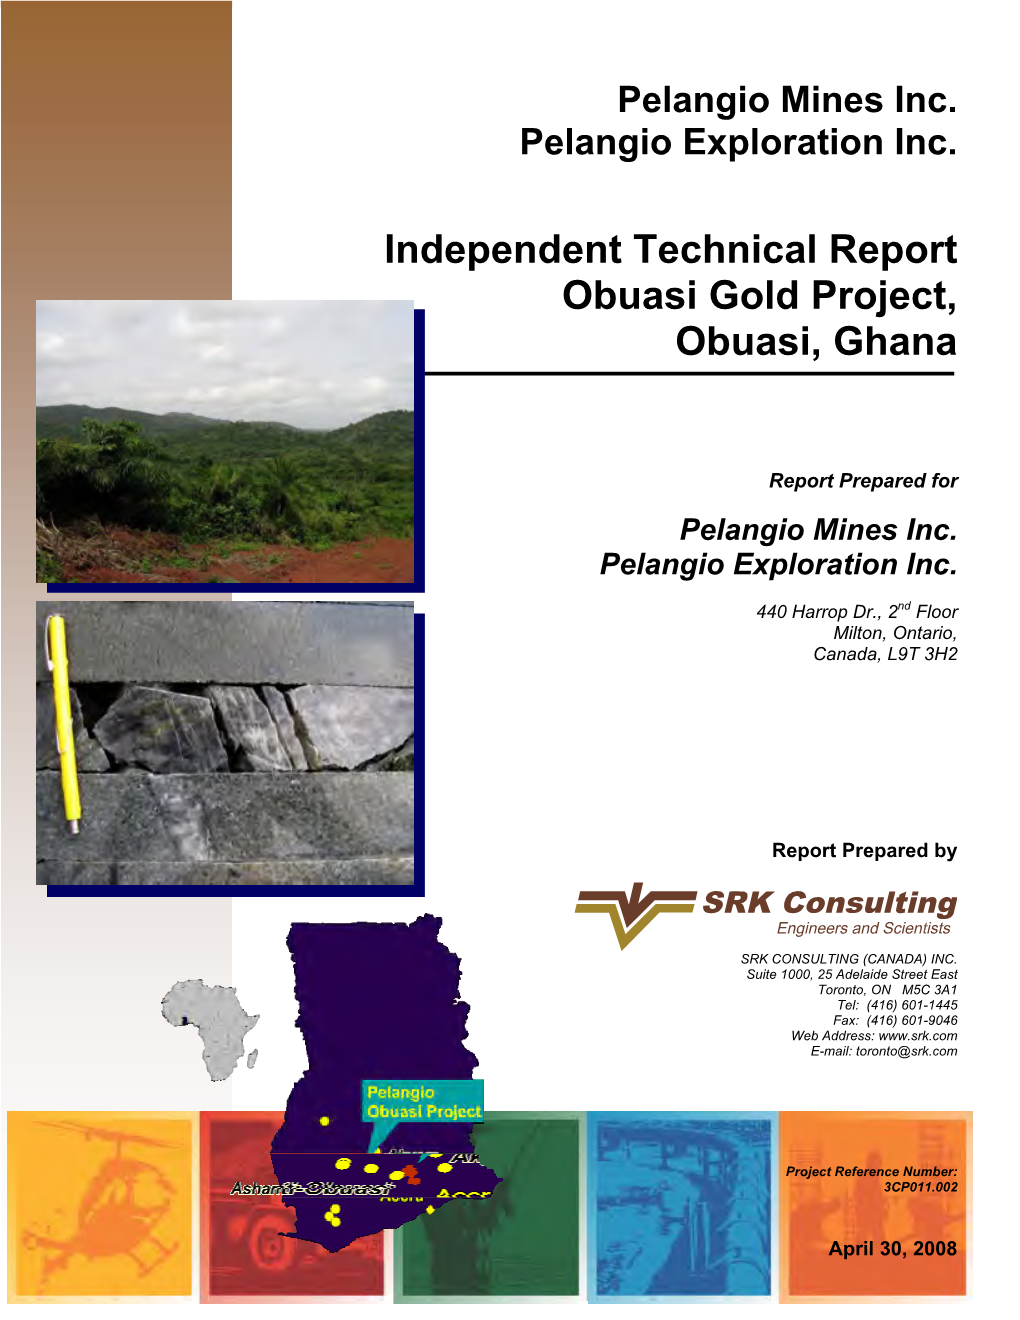 Independent Technical Report Obuasi Gold Project, Obuasi, Ghana